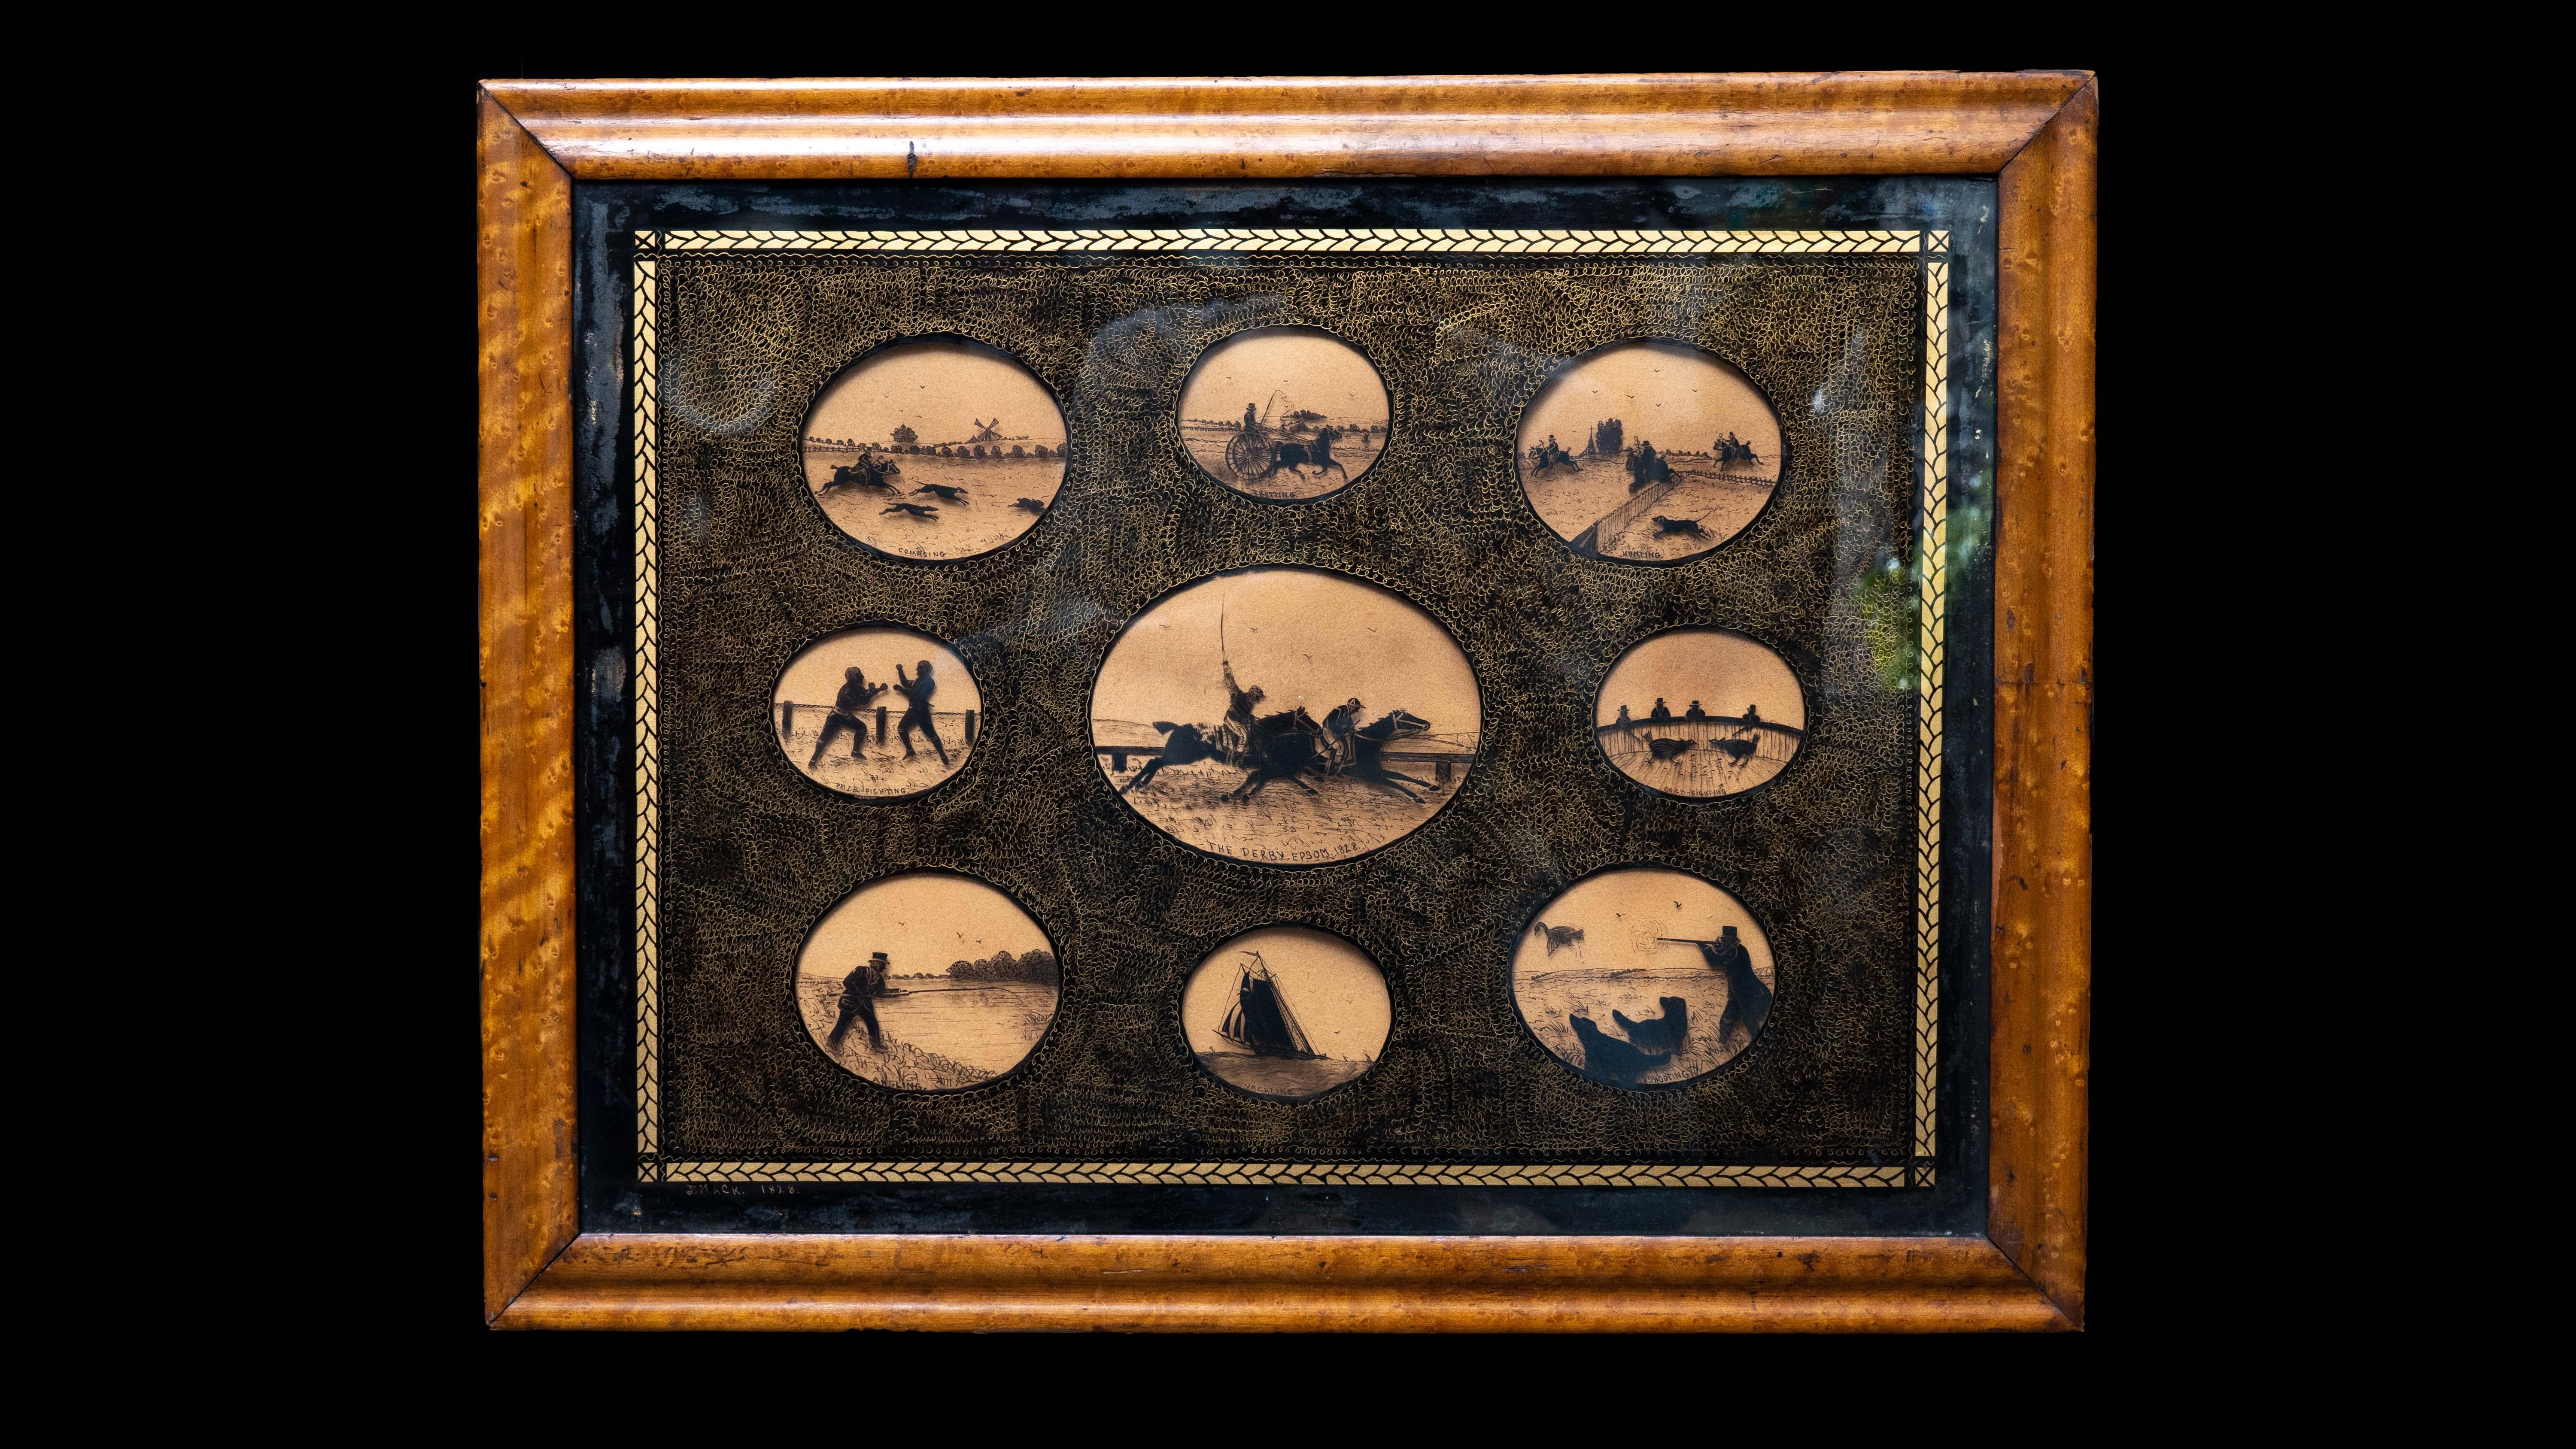 9 Eglouise medallion silhouettes of sporting Scenes dated 1828 and signed J. Mack

Measures: 22.5